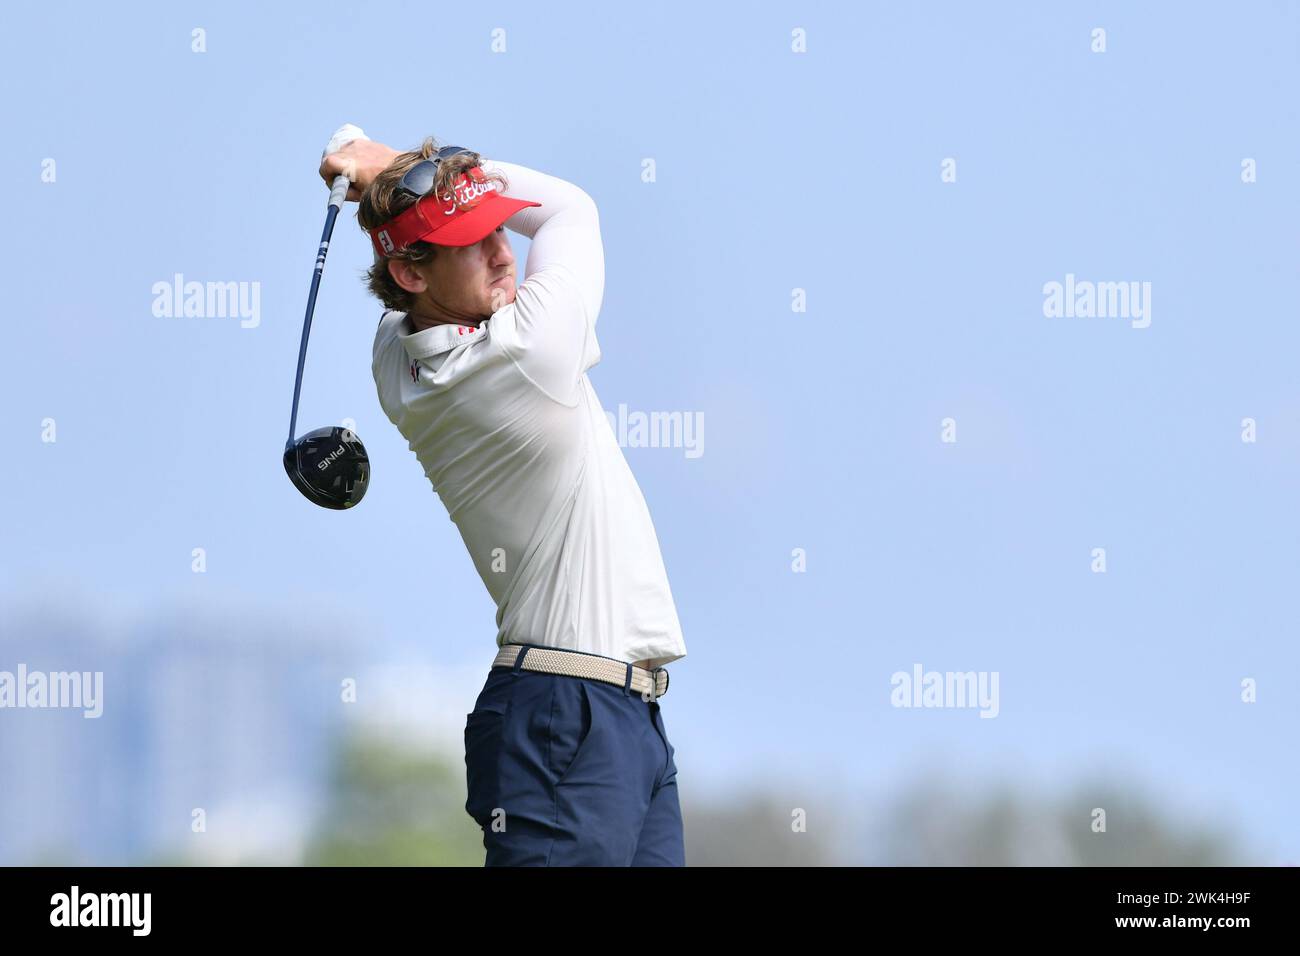 SERDANG - FEB 18: Jared Du Toit of Canada shot his tee at the 4th hole during final round 0f IRS Prima Malaysia Open 2024 at The Mines Resort & Golf Club, Serdang, Selangor, Malaysia on February 18, 2024.  (Photo by Ali Mufti) Credit: Ali Mufti/Alamy Live News Stock Photo